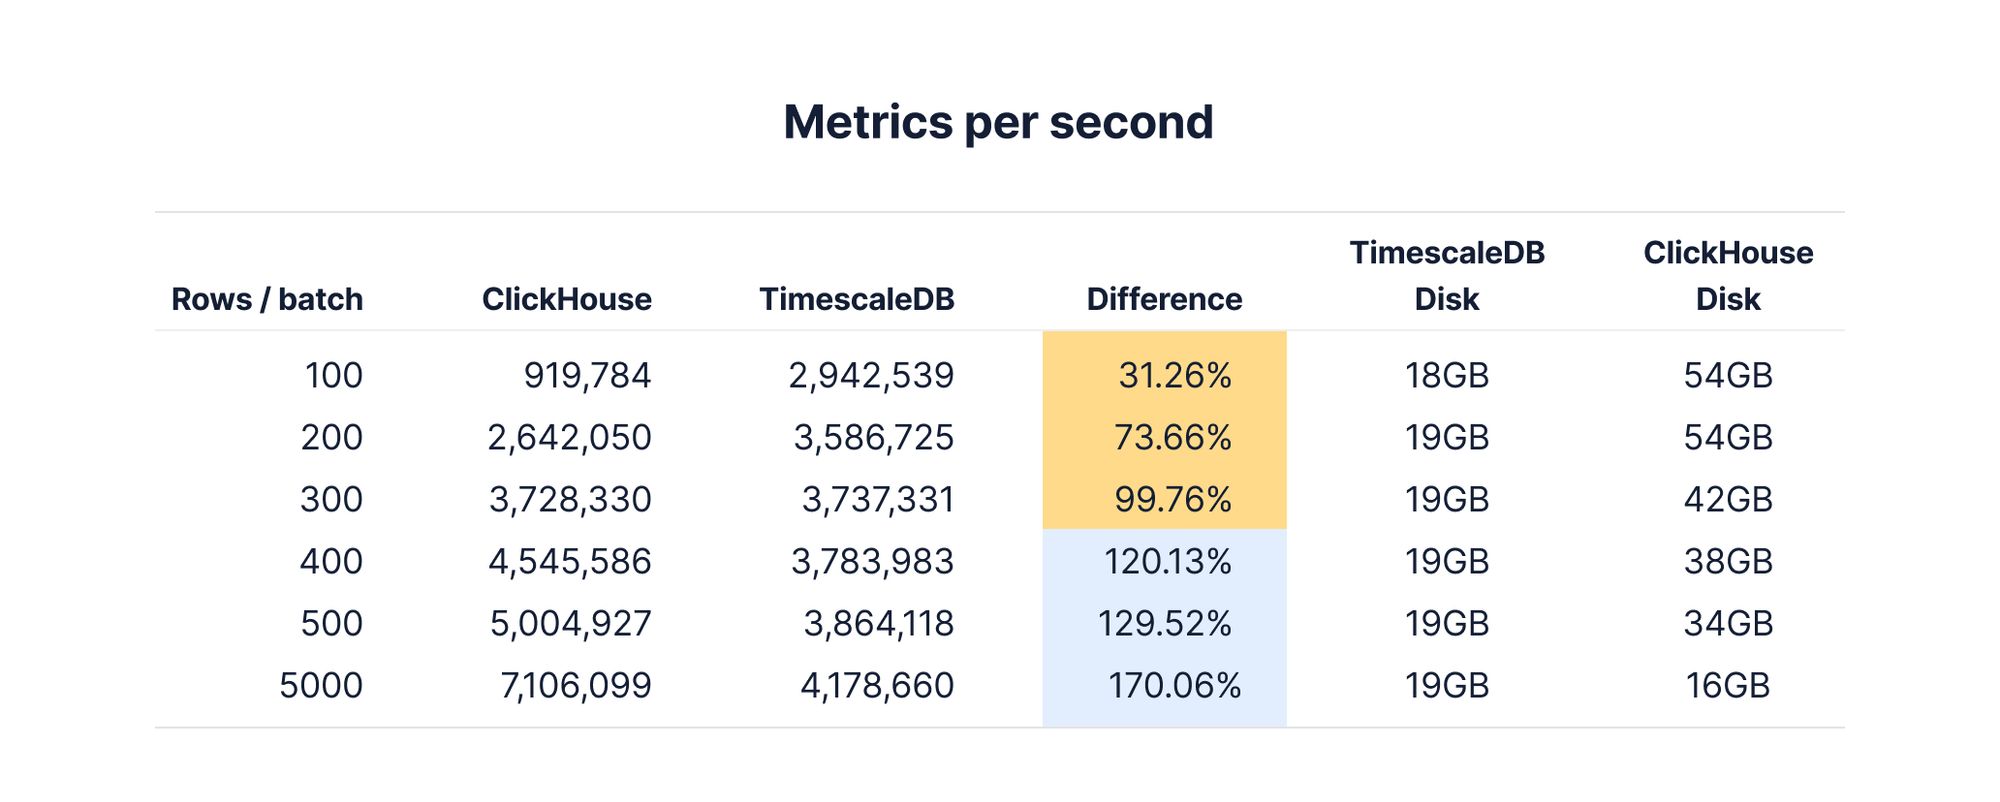 Table showing the impact of using smaller batch sizes has on TimescaleDB and ClickHouse. TimescaleDB insert performance and disk usage stays steady, while ClickHouse performance is negatively impacted